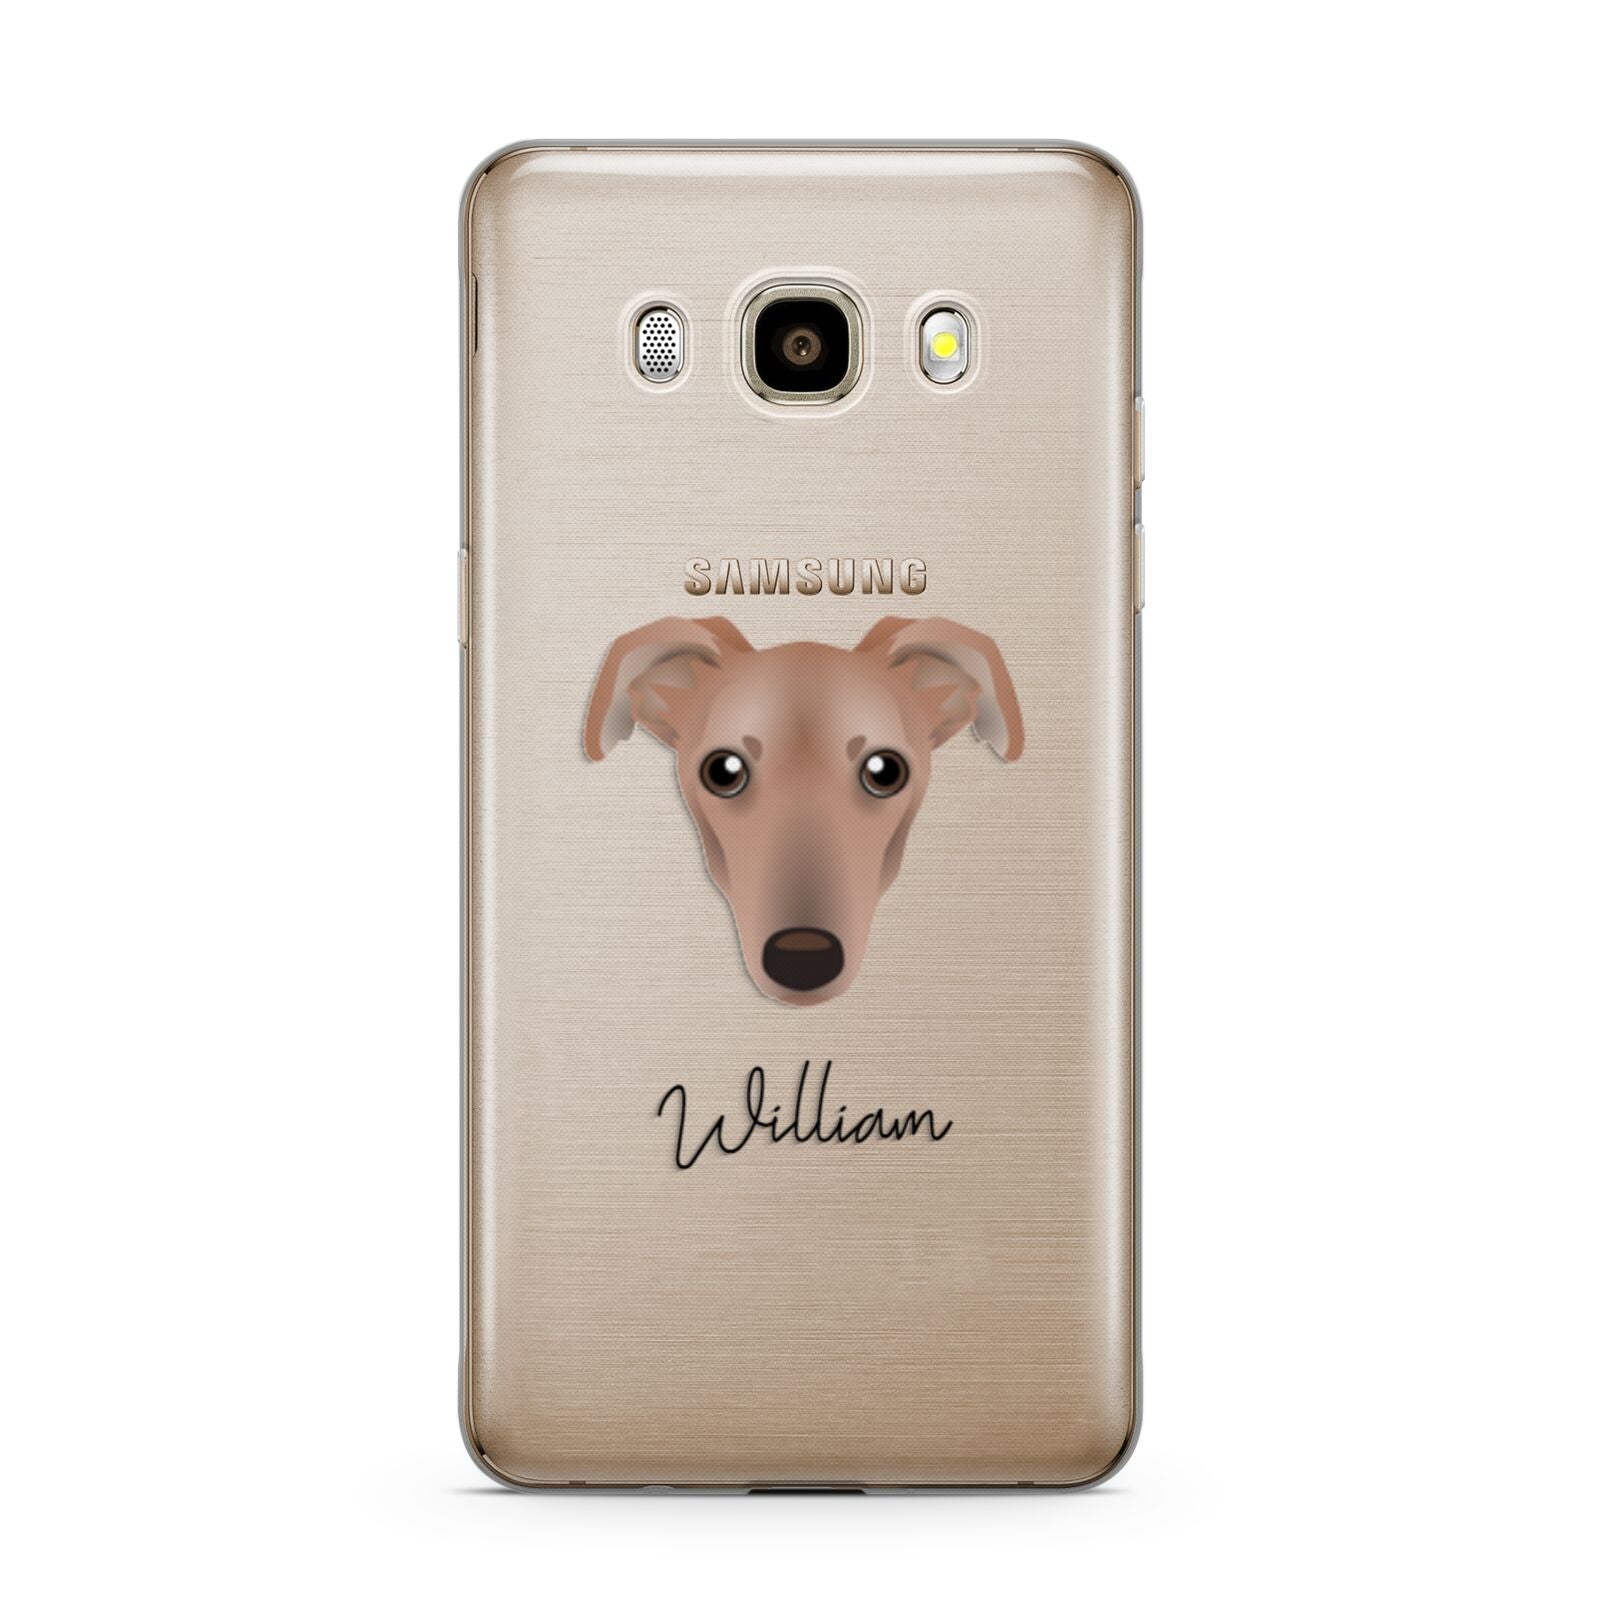 Lurcher Personalised Samsung Galaxy J7 2016 Case on gold phone